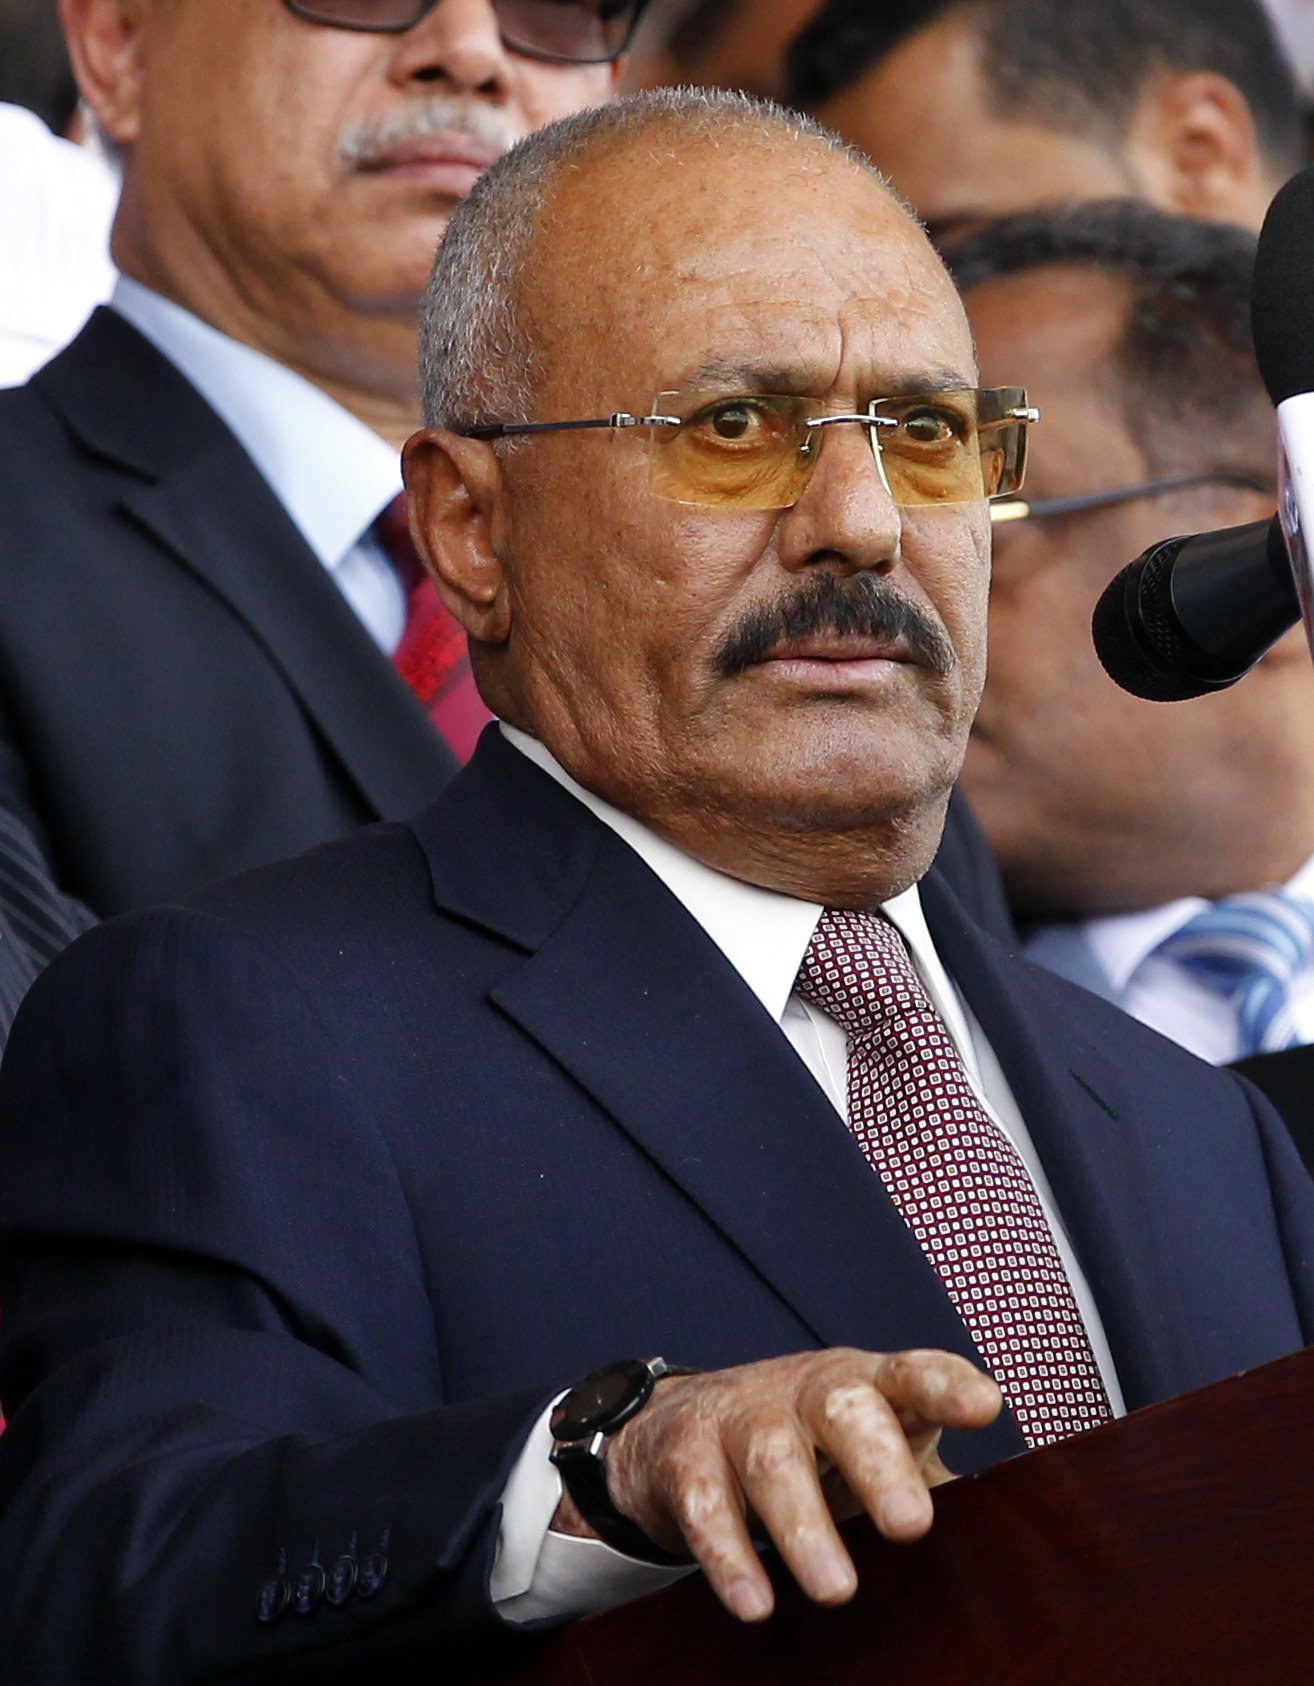 epa06366597 (FILE) - Yemeni ex-president Ali Abdullah Saleh attends a rally marking the 35th anniversary celebrations for the formation of his General People's Congress party, in Sanaa, Yemen, 24 August 2017 (reissued 04 December 2017). Media broadcasters controlled by Houthi rebels said on 04 December that the former president Ali Abdullah Saleh had been killed in his home by Houthi fighters. Saleh's party, however, has denied the reports of his death.  EPA/YAHYA ARHAB (FILE) YEMEN CONFLICT